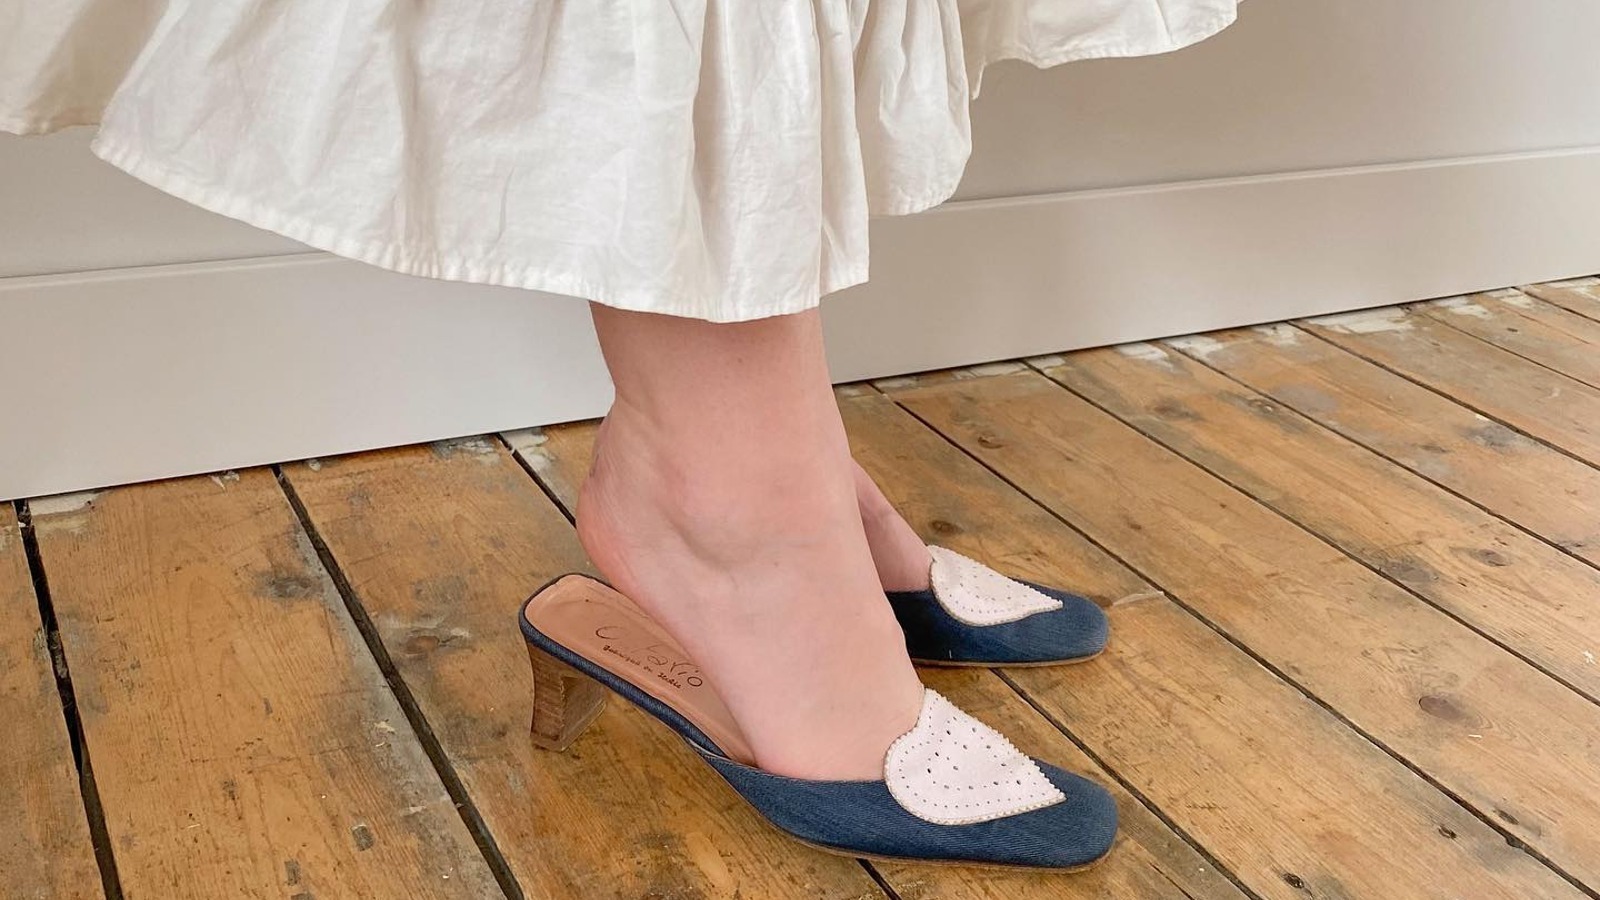 The Skirt And Shoes Combo You Need For A Trendy, Preppy Look This Summer